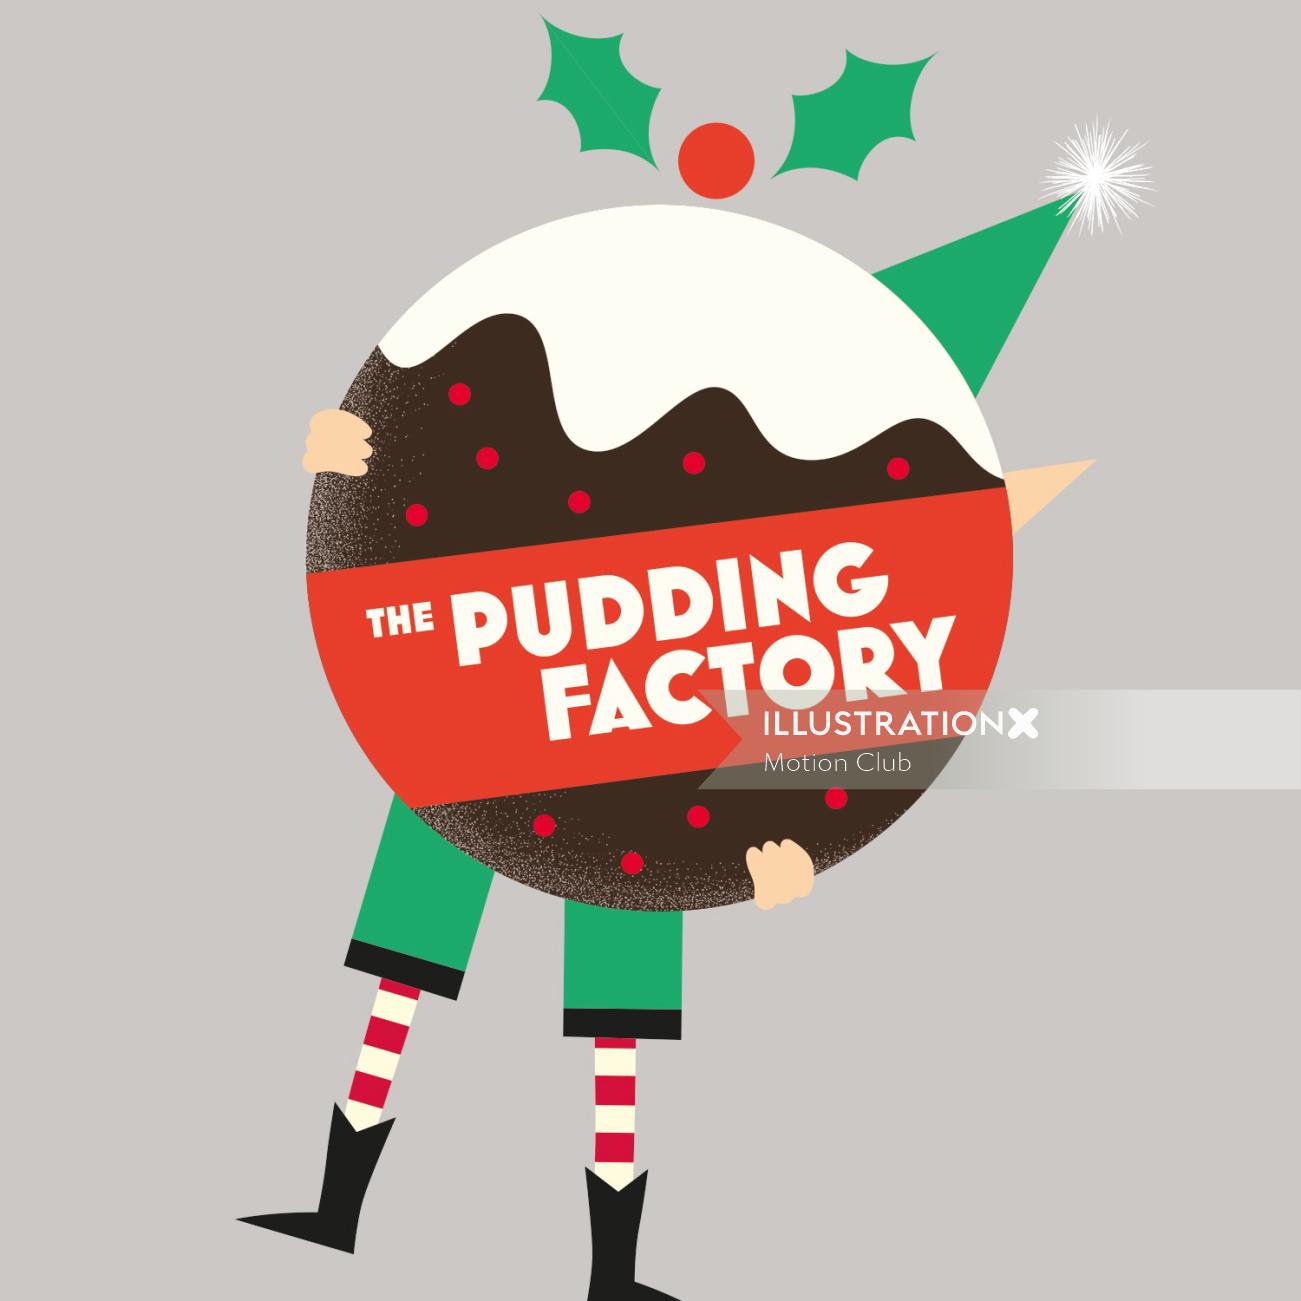 The pudding factory
